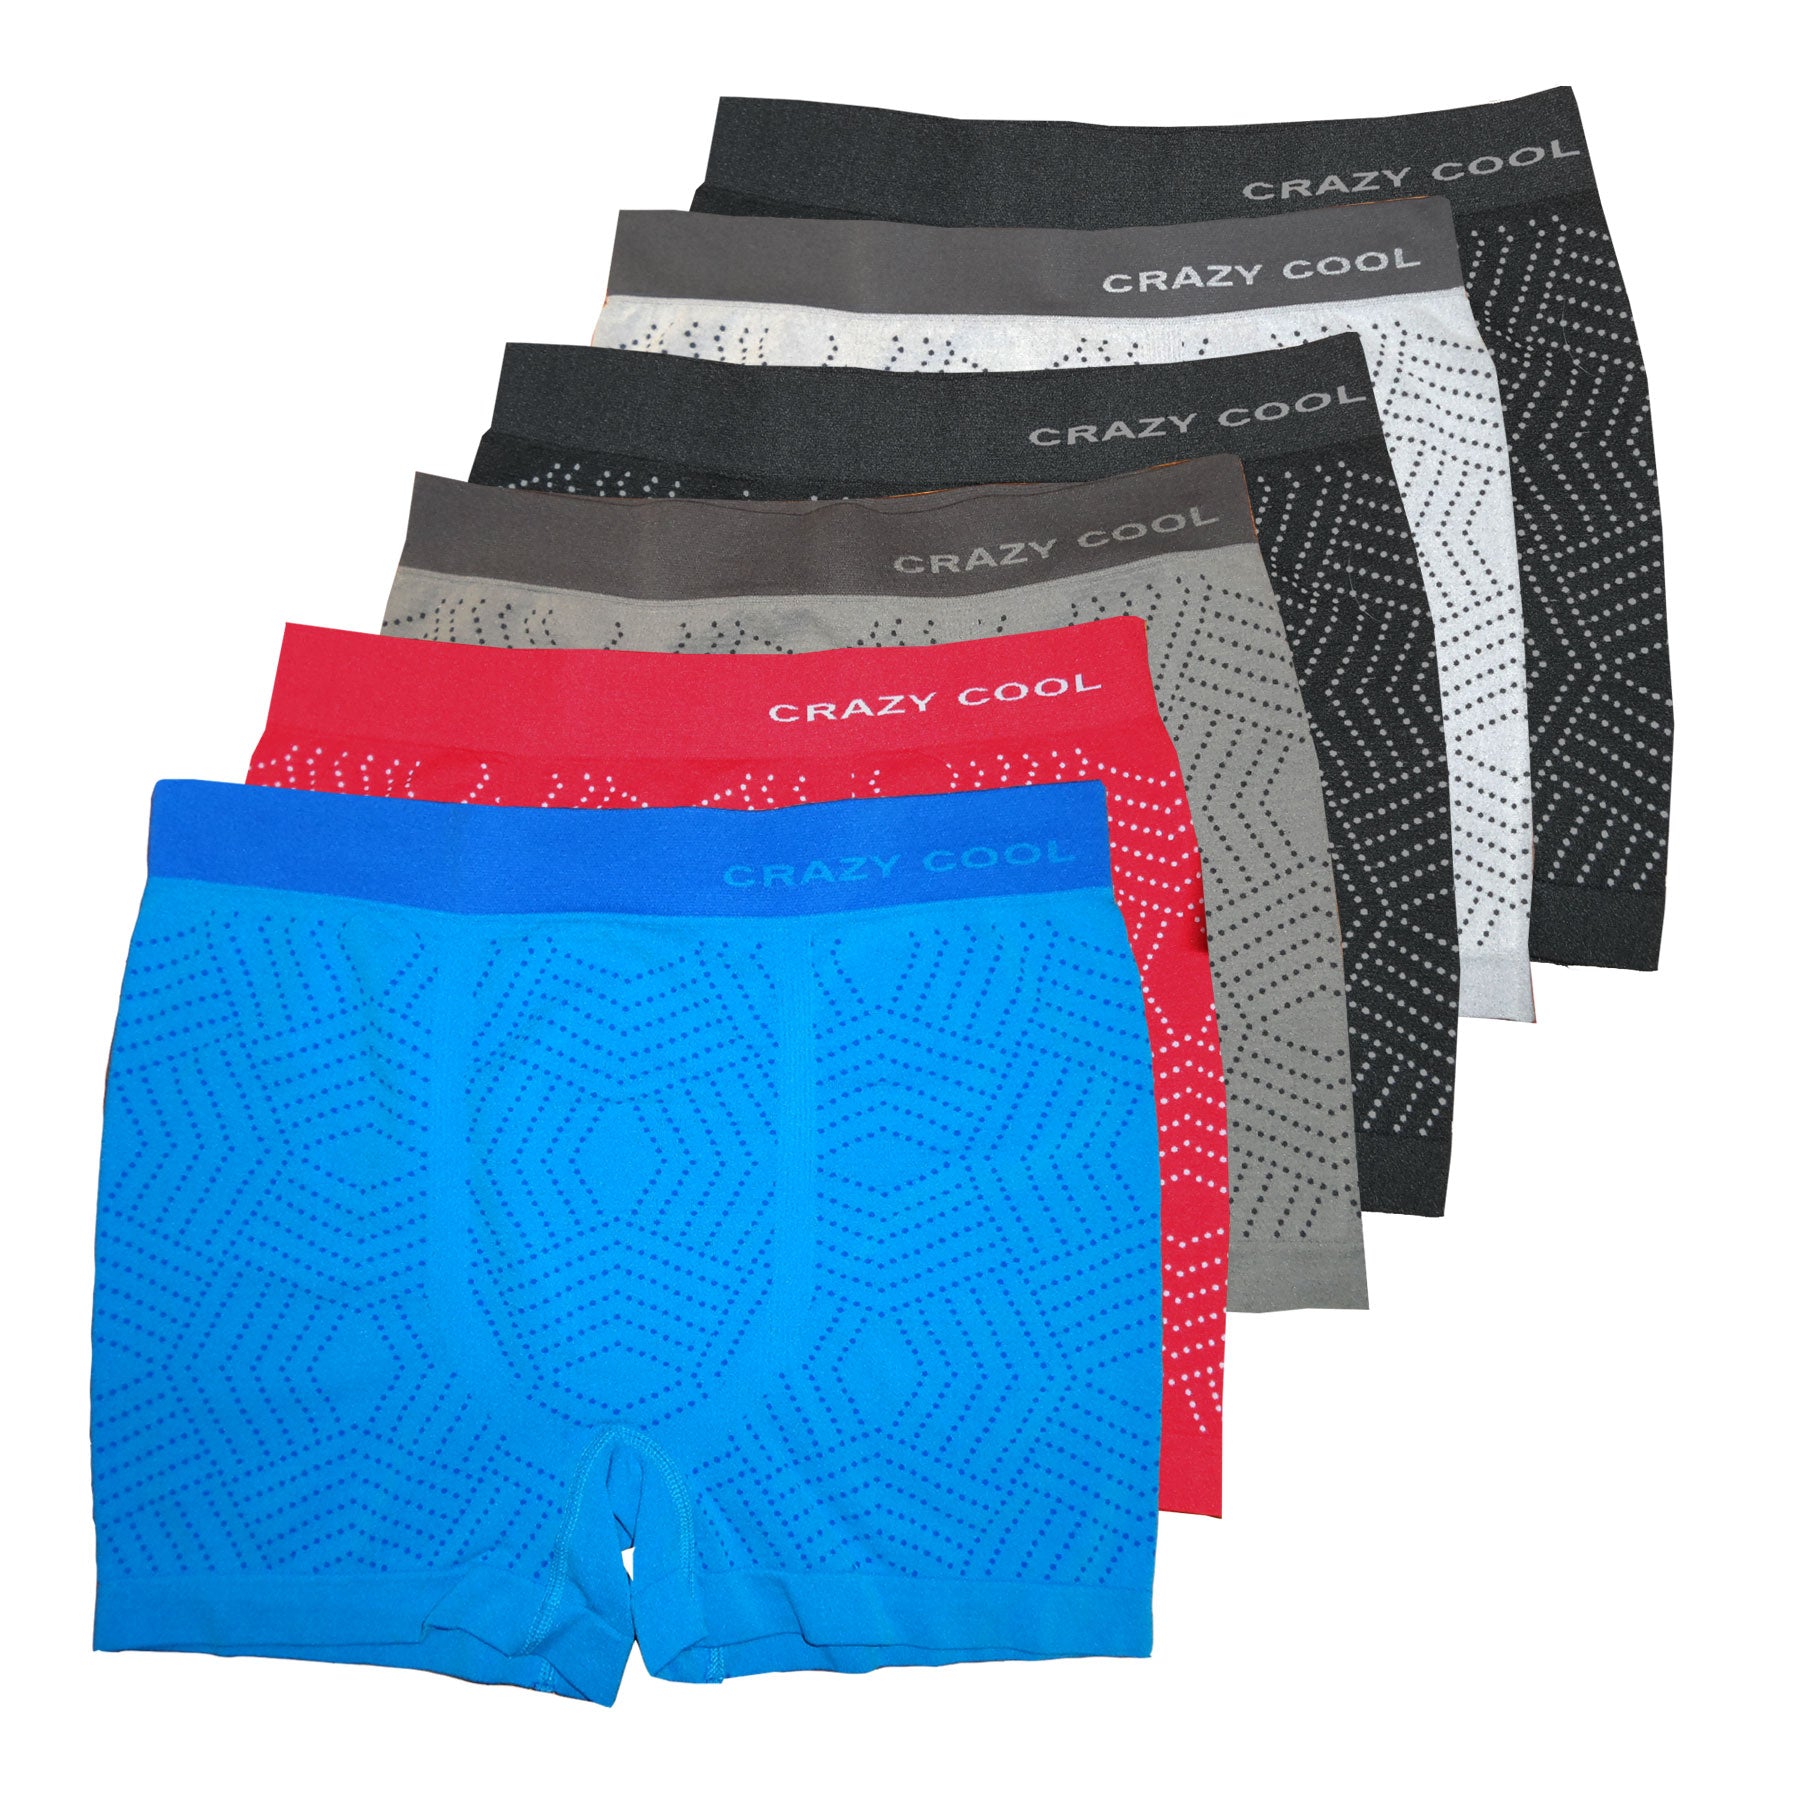 Seamfree Underwear - Mens Seamless Boxers - 6 Pack, Shop Today. Get it  Tomorrow!